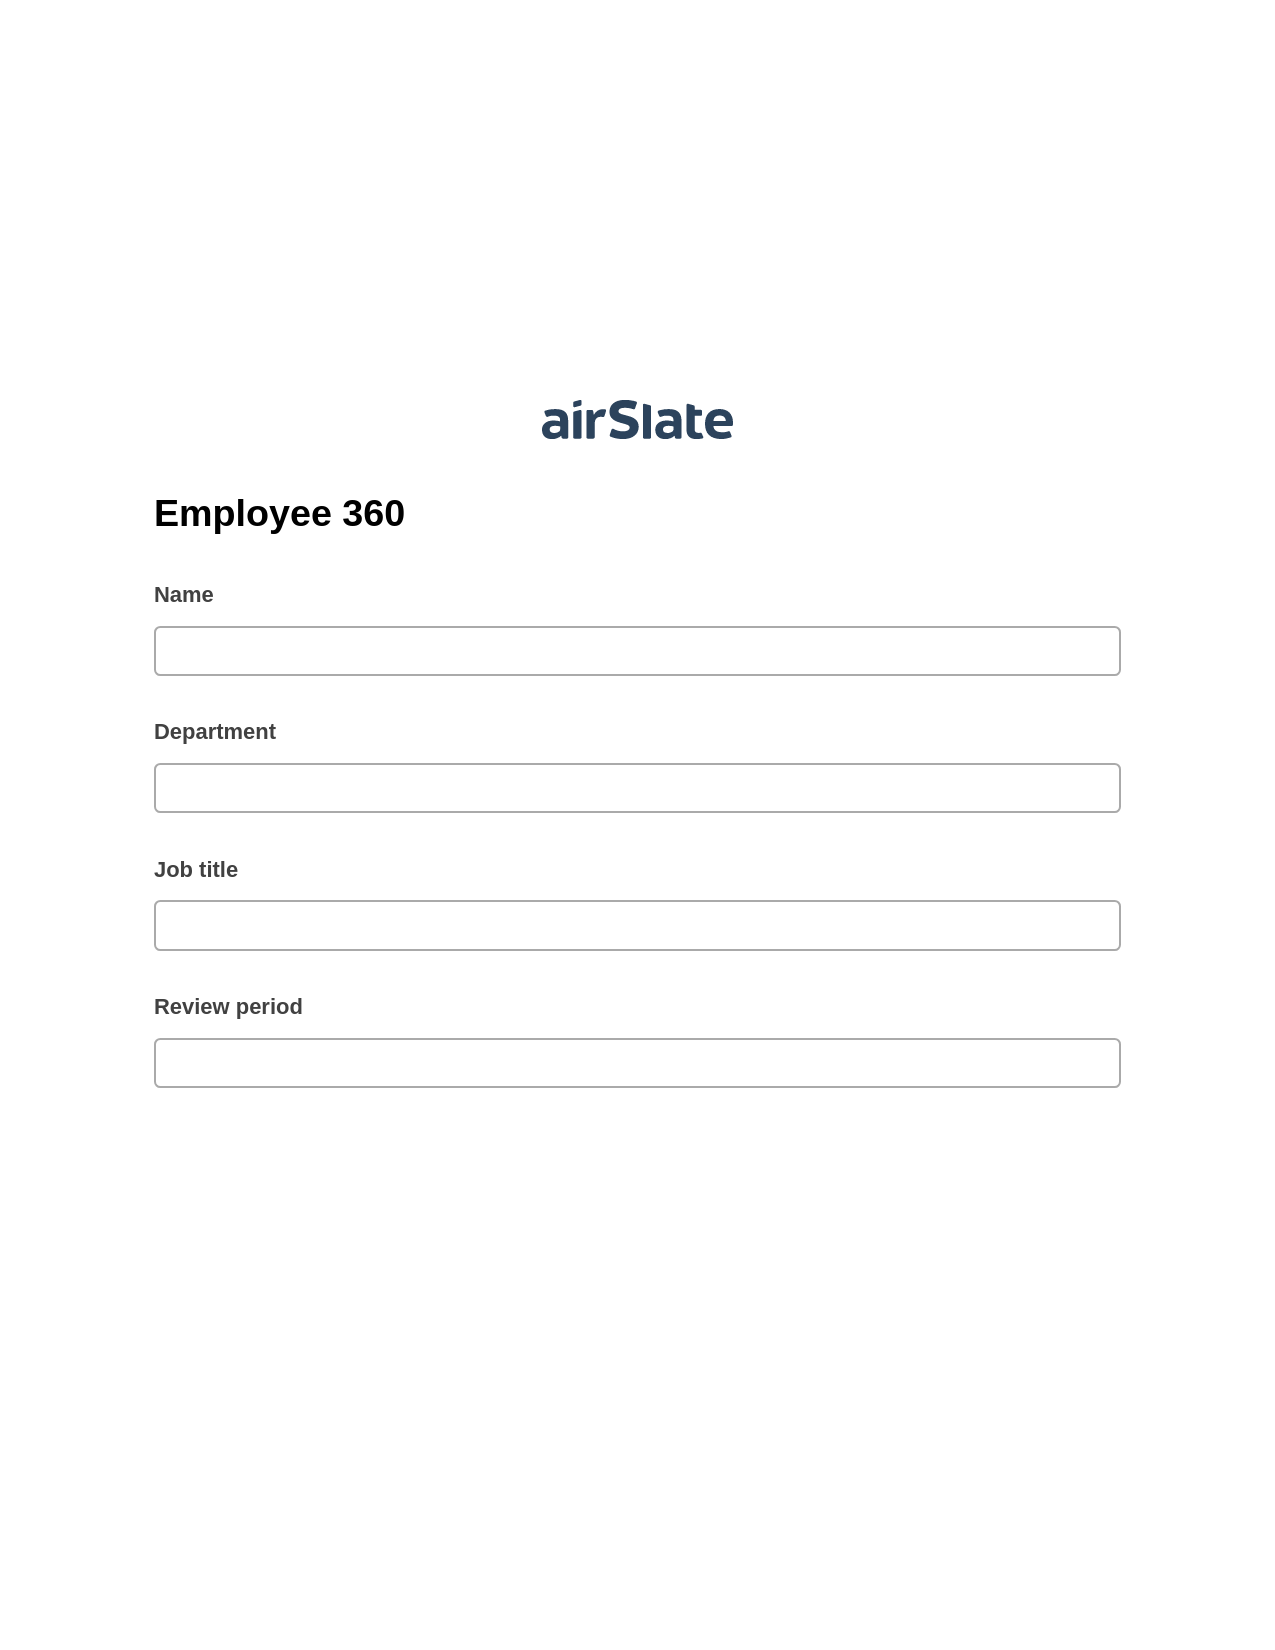 Multirole Employee 360 Pre-fill Dropdowns from CSV file Bot, Update MS Dynamics 365 Record Bot, Export to Google Sheet Bot